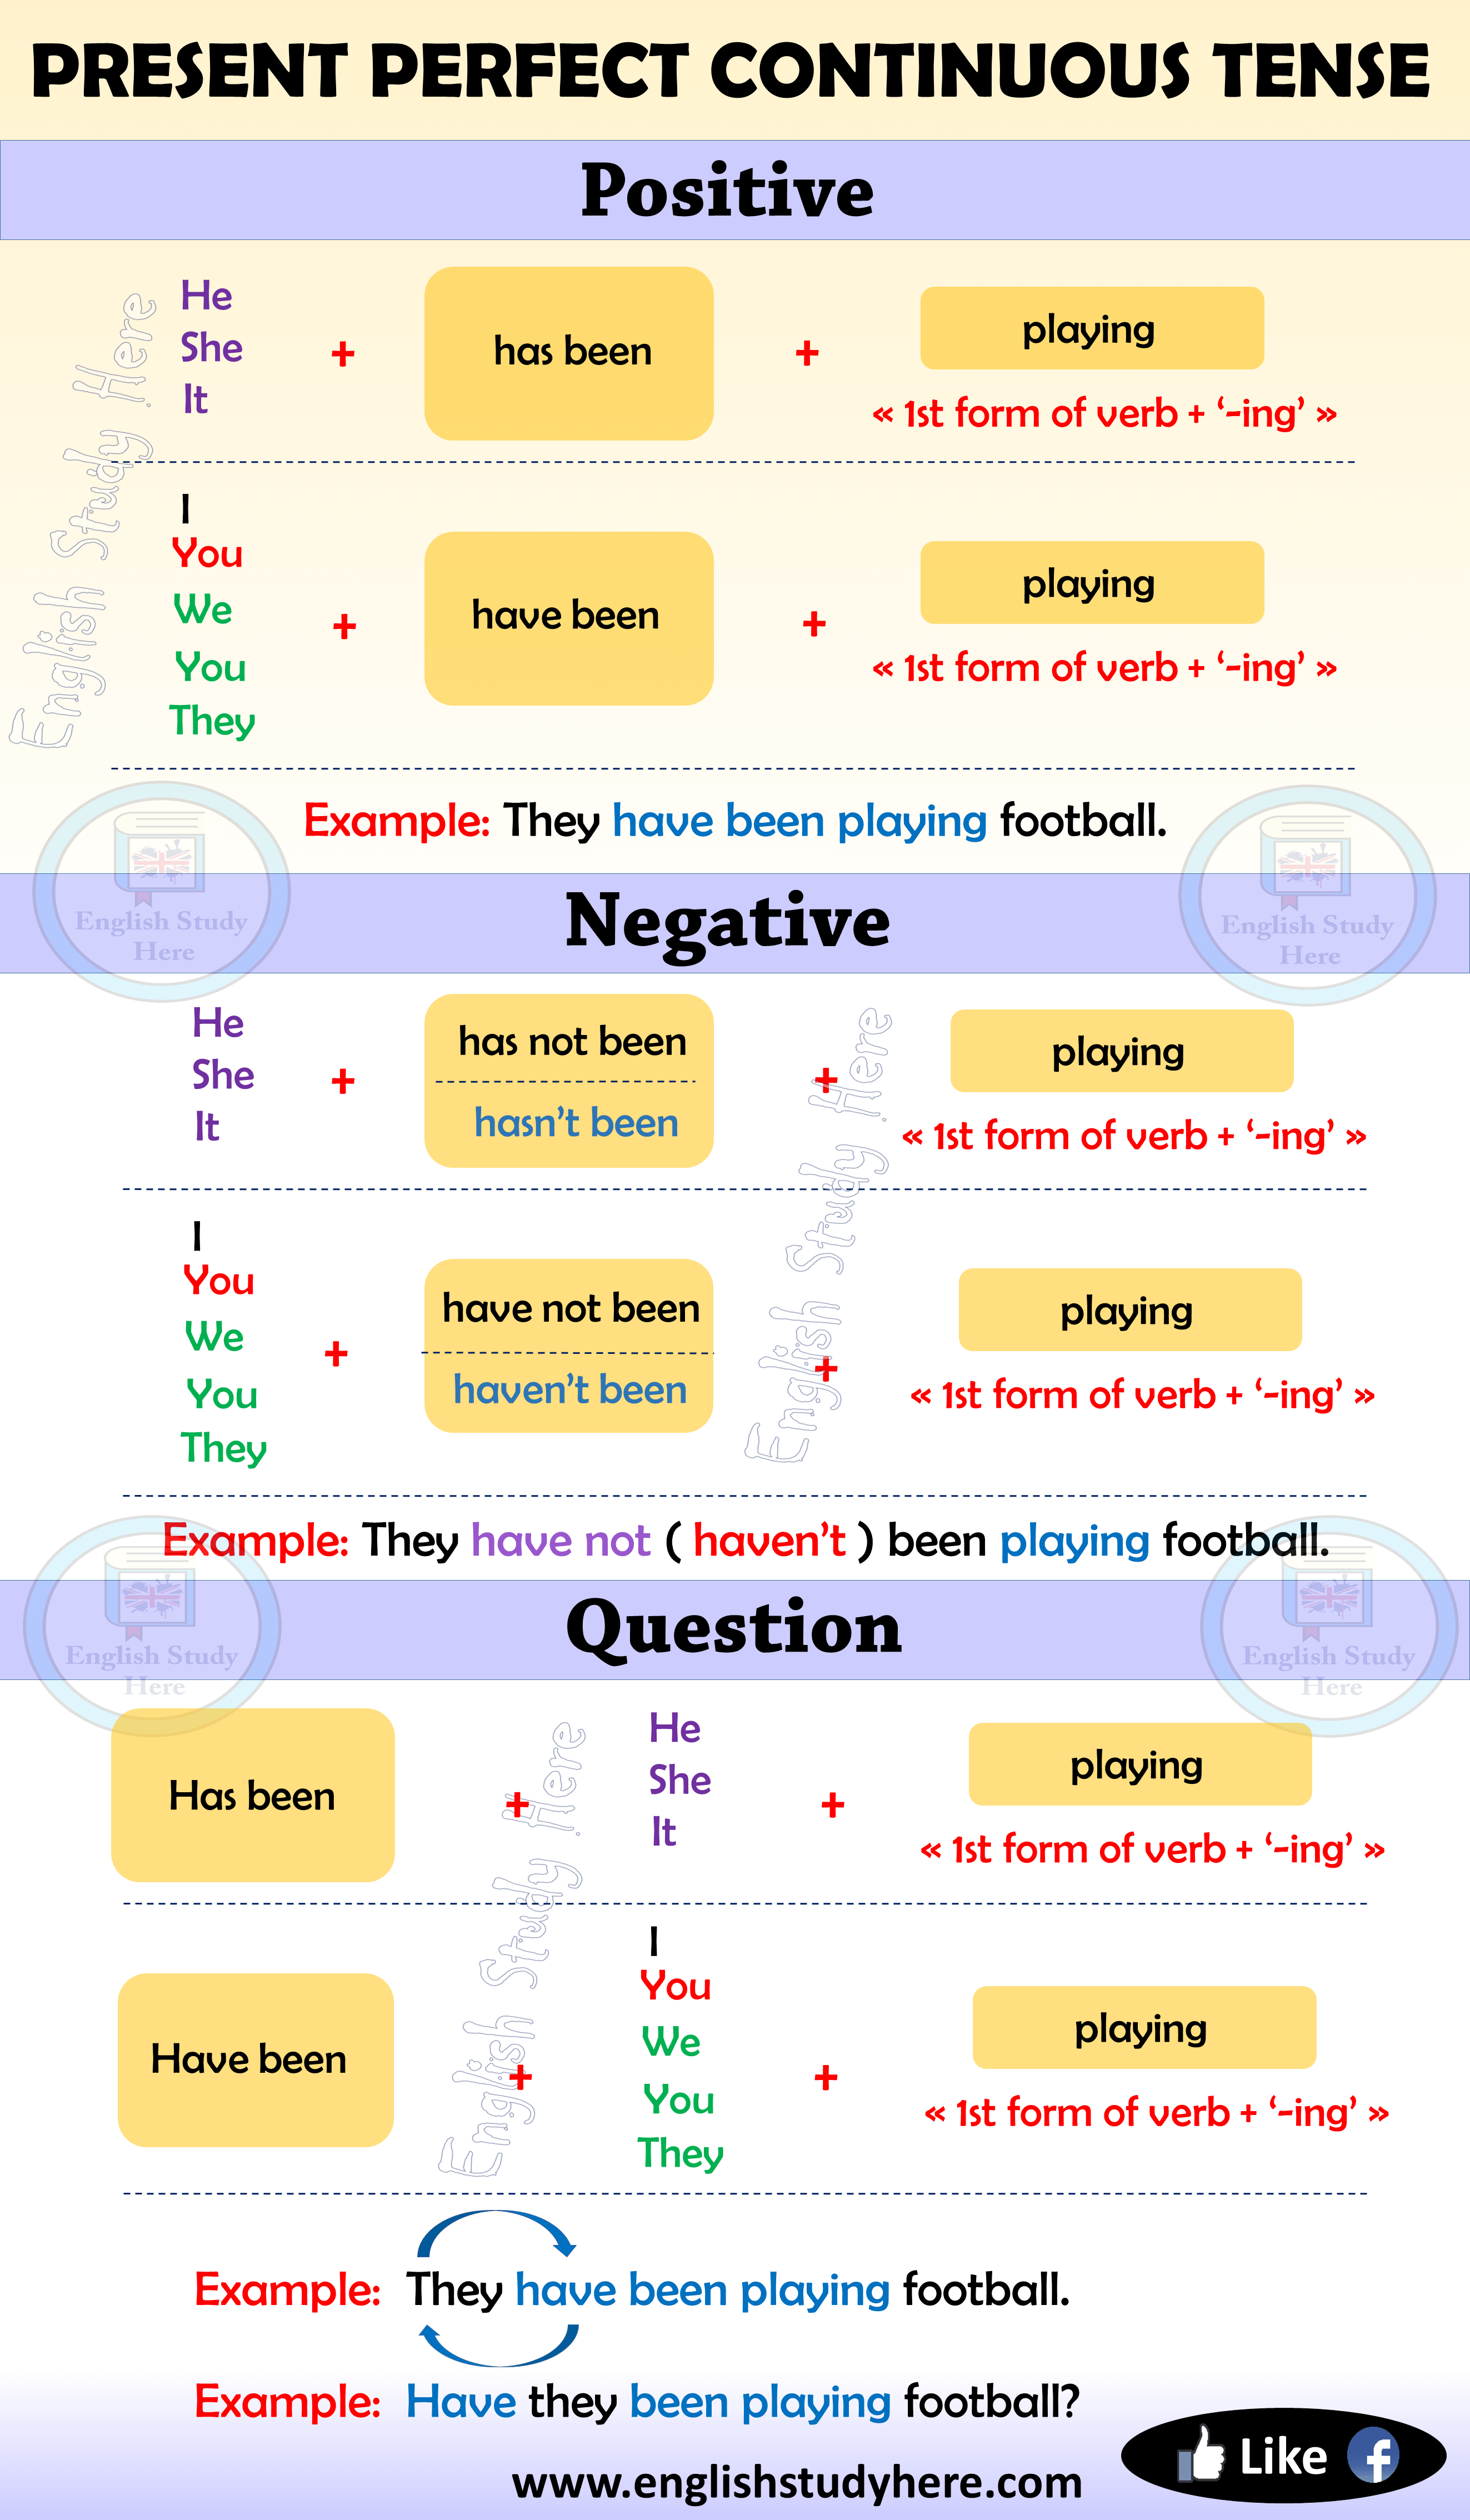 Present Perfect Continuous Tense in English - English Study Here